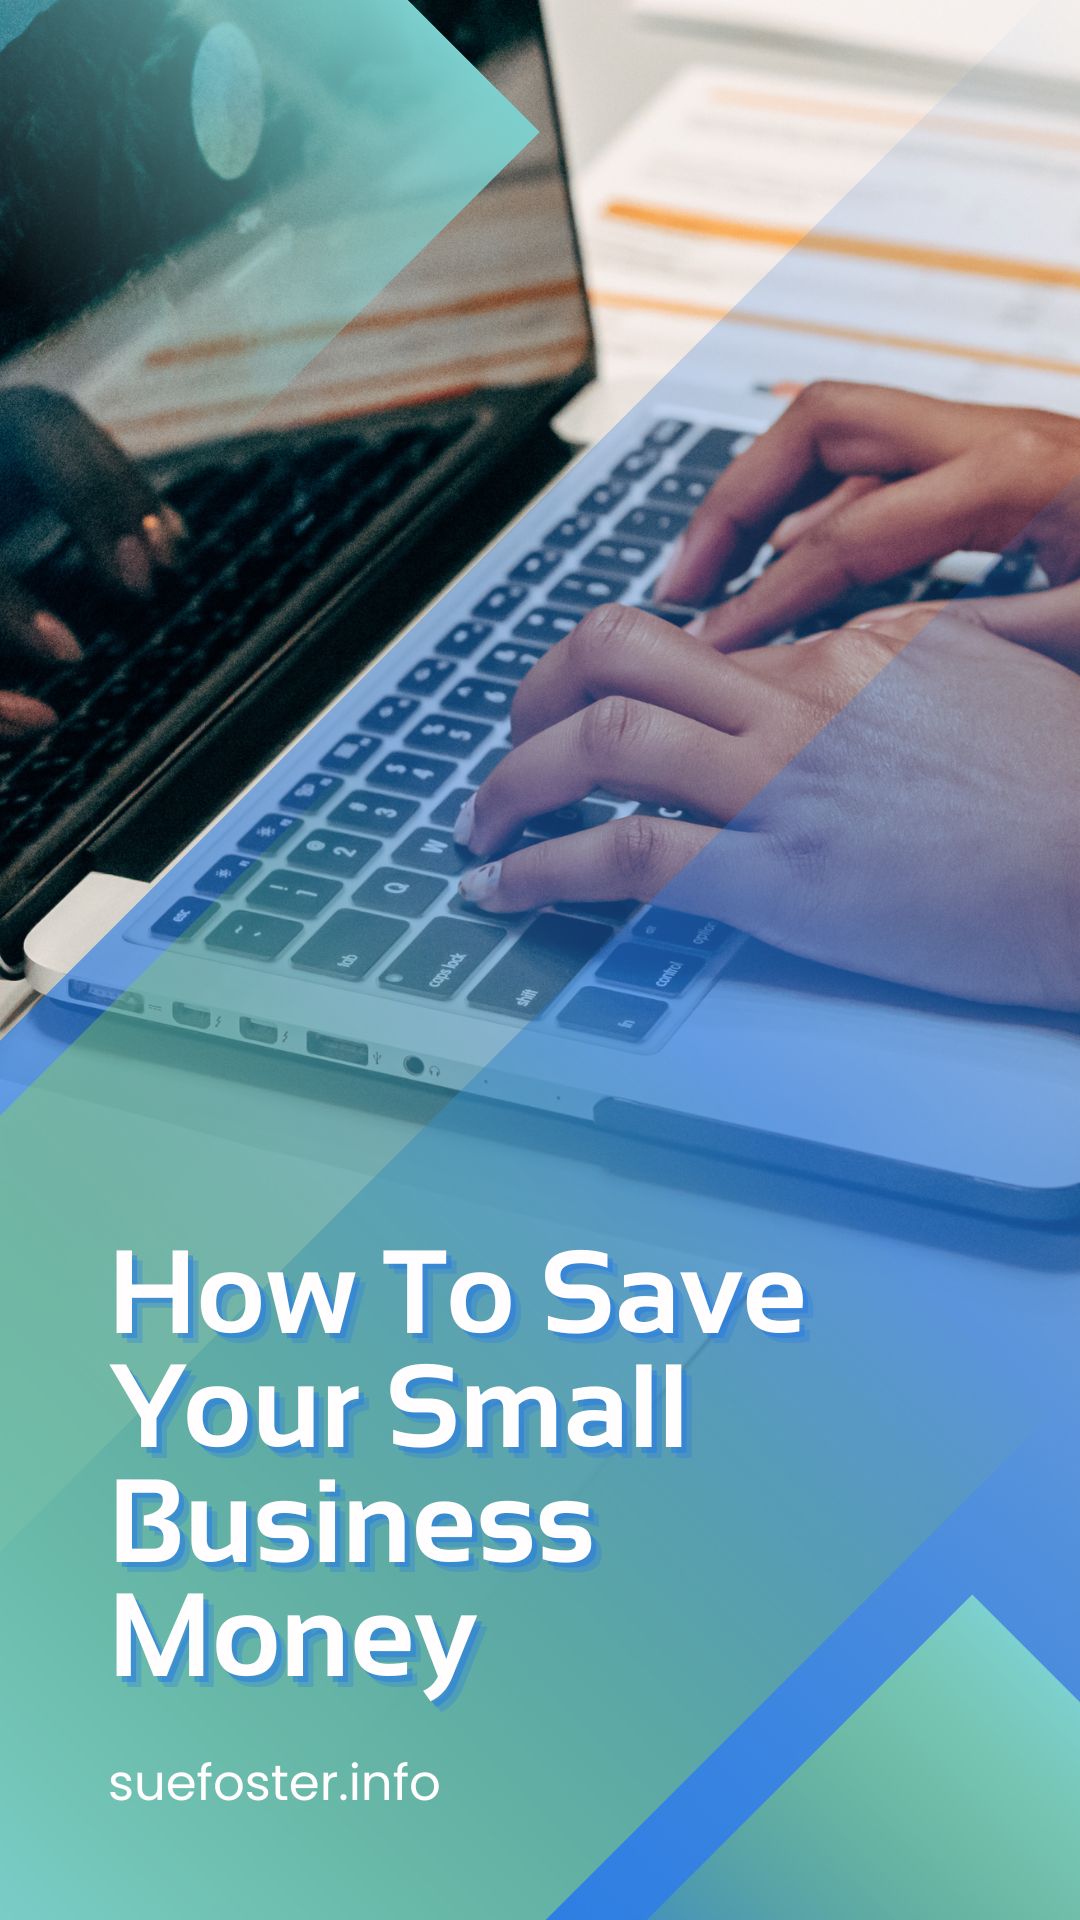 Here are some top tips that you can use to save your small business money! 